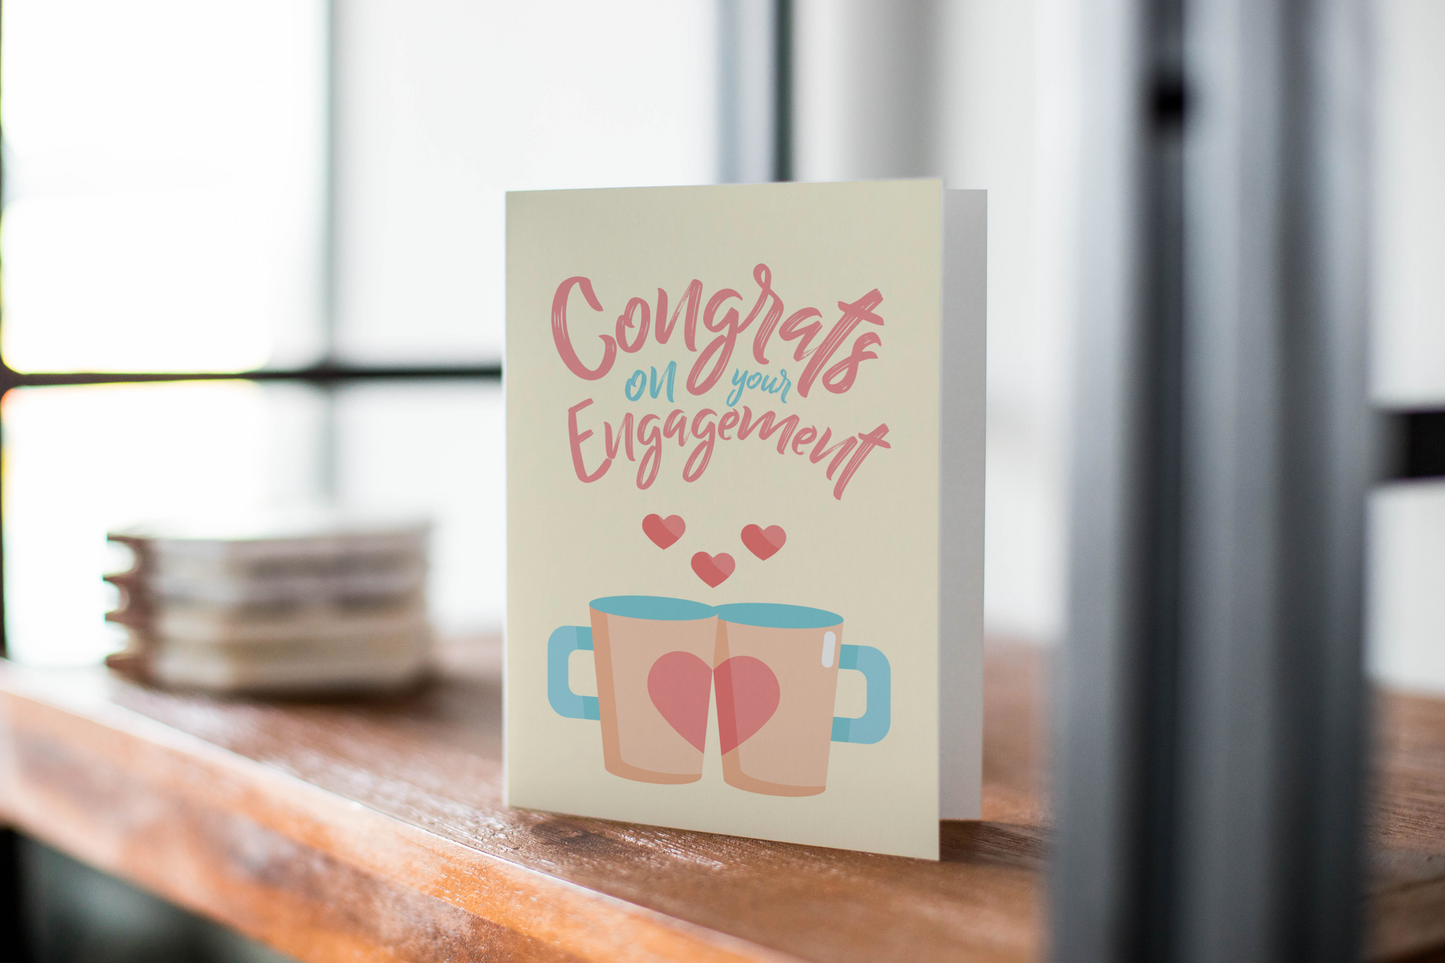 Congratulations Card: Congratulations On Your Engagement, Mr and Mrs Mugs.